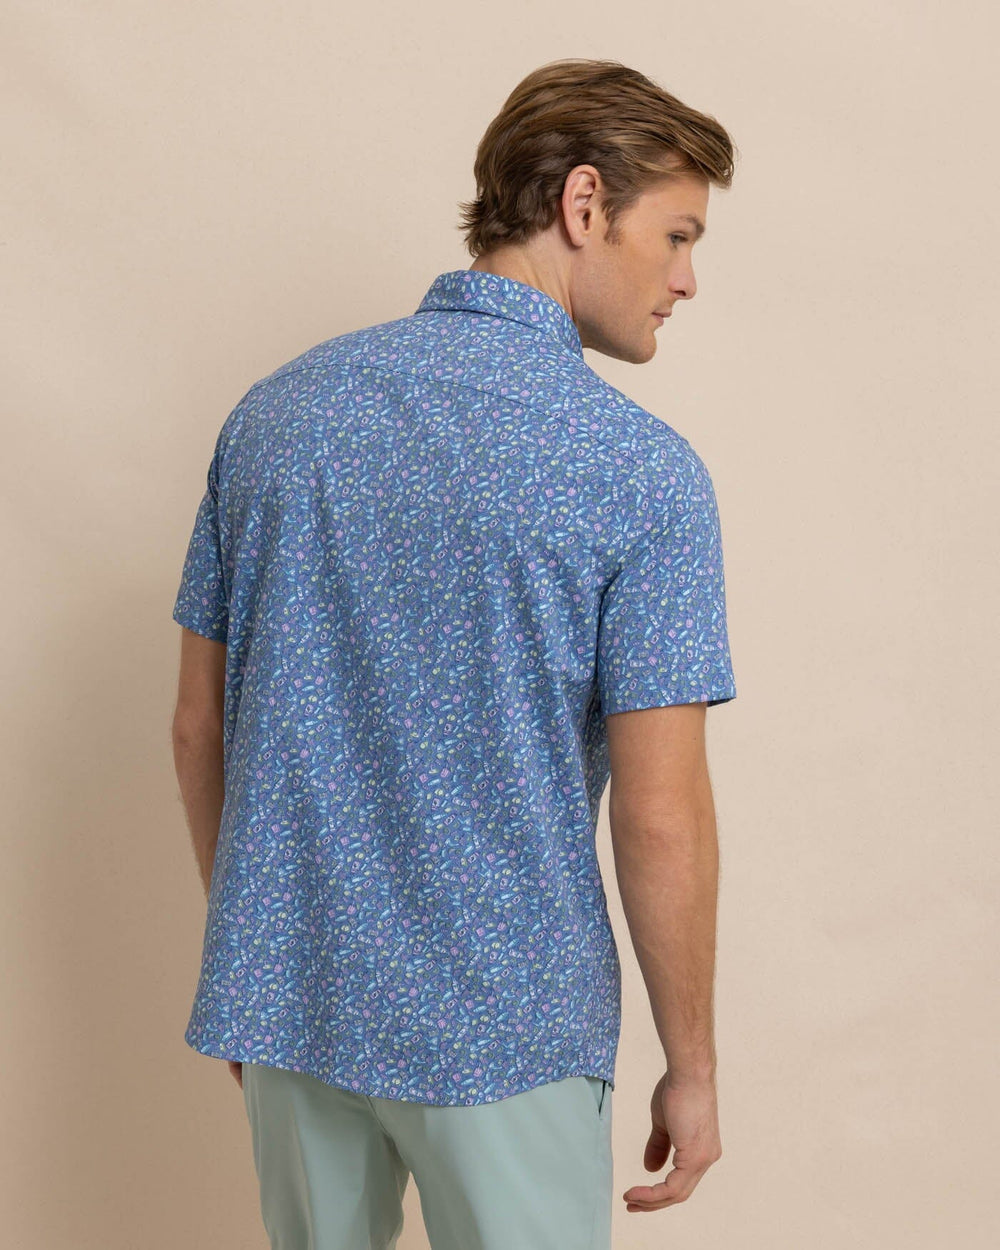 The back view of the Southern Tide brrr Intercoastal Dazed and Transfused Short Sleeve Sport Shirt by Southern Tide - Coronet Blue